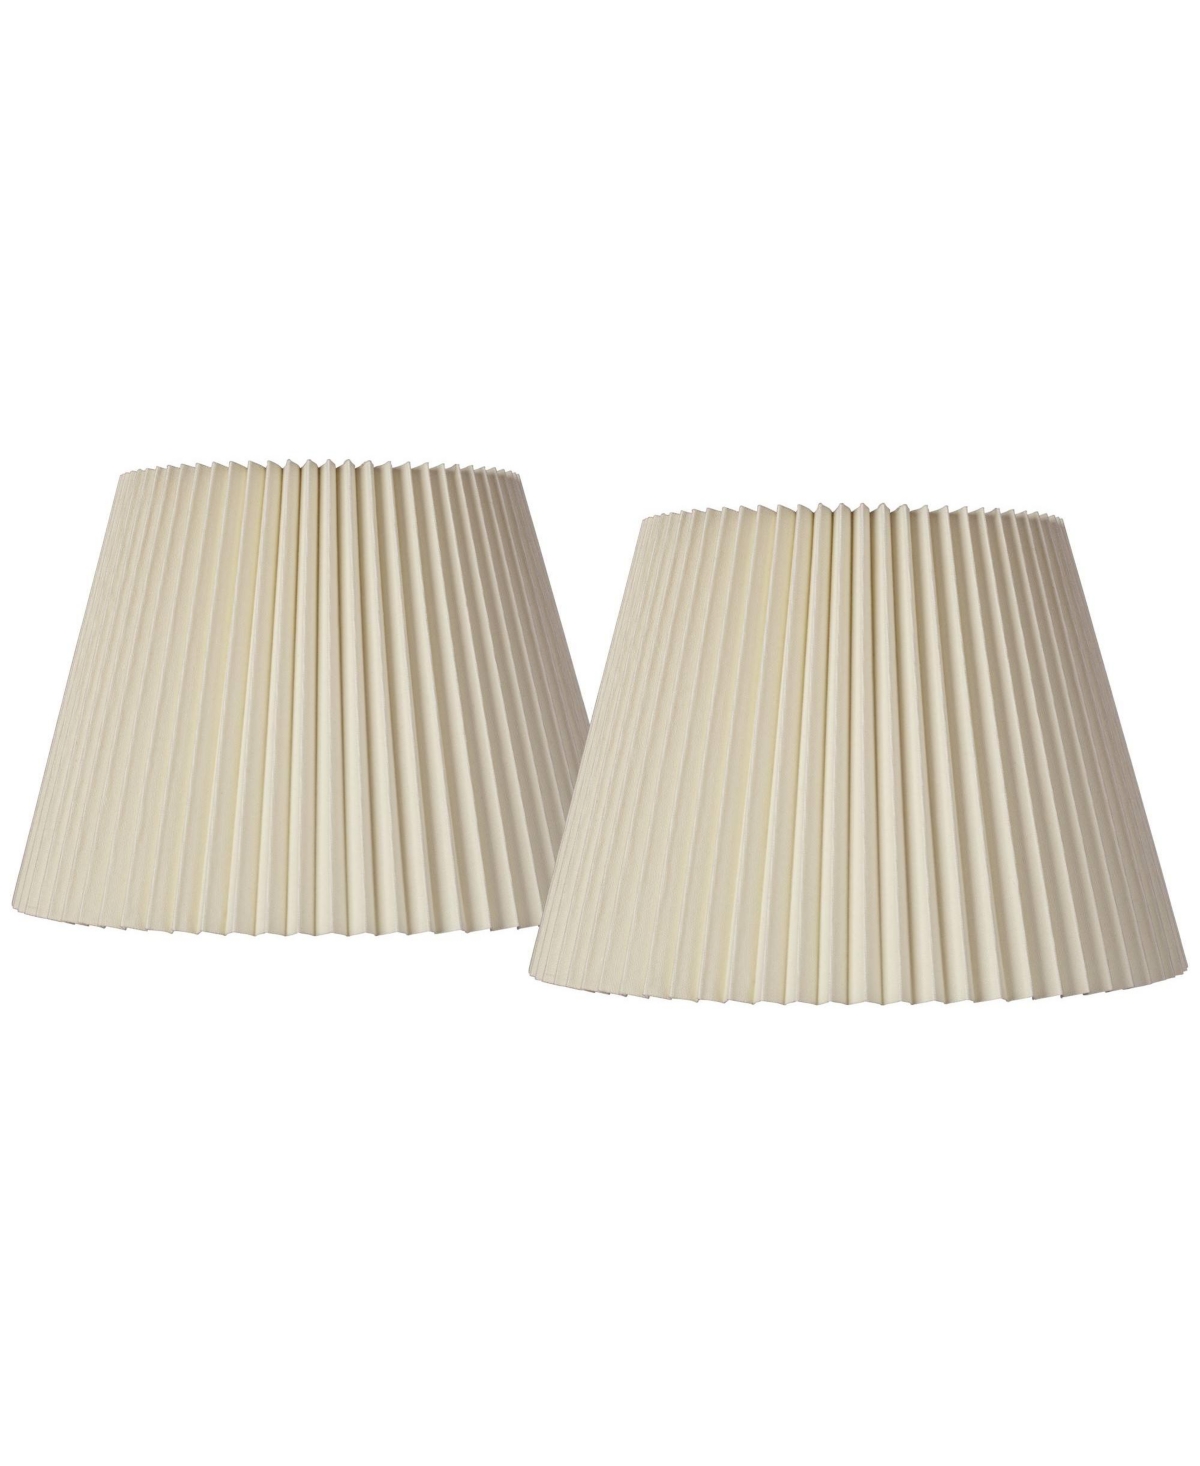 Springcrest Set Of 2 Drum Lamp Shades Ivory Knife Pleat Medium 8" Top X 14.5" Bottom X 10" High Spider With Repl In White